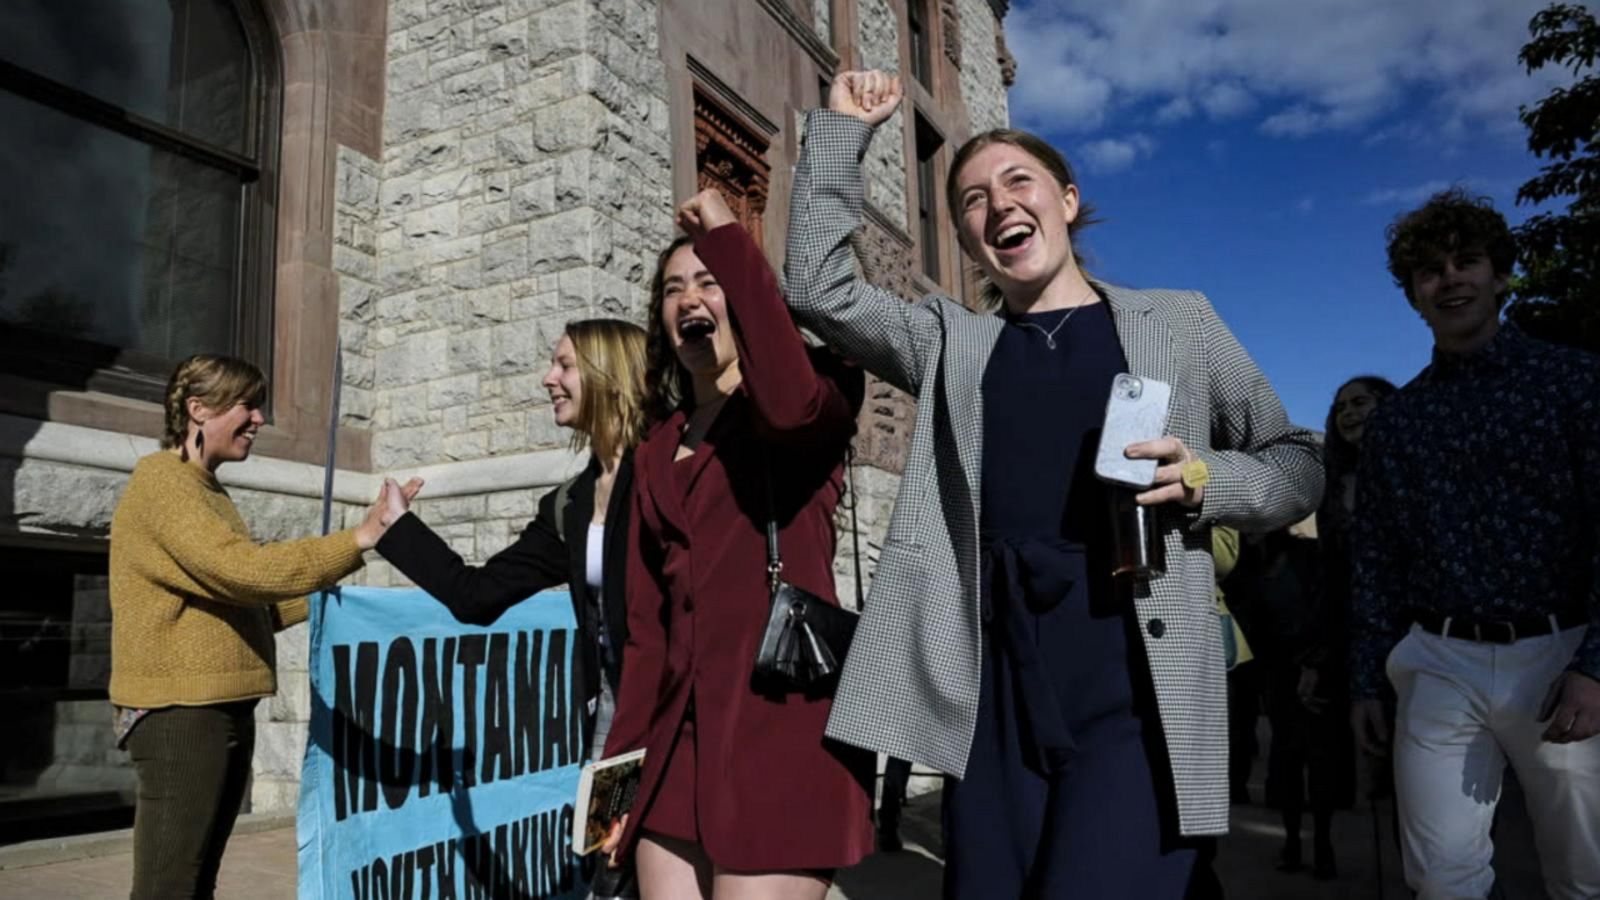 VIDEO: Montana youth win lawsuit against state for promoting fossil fuels